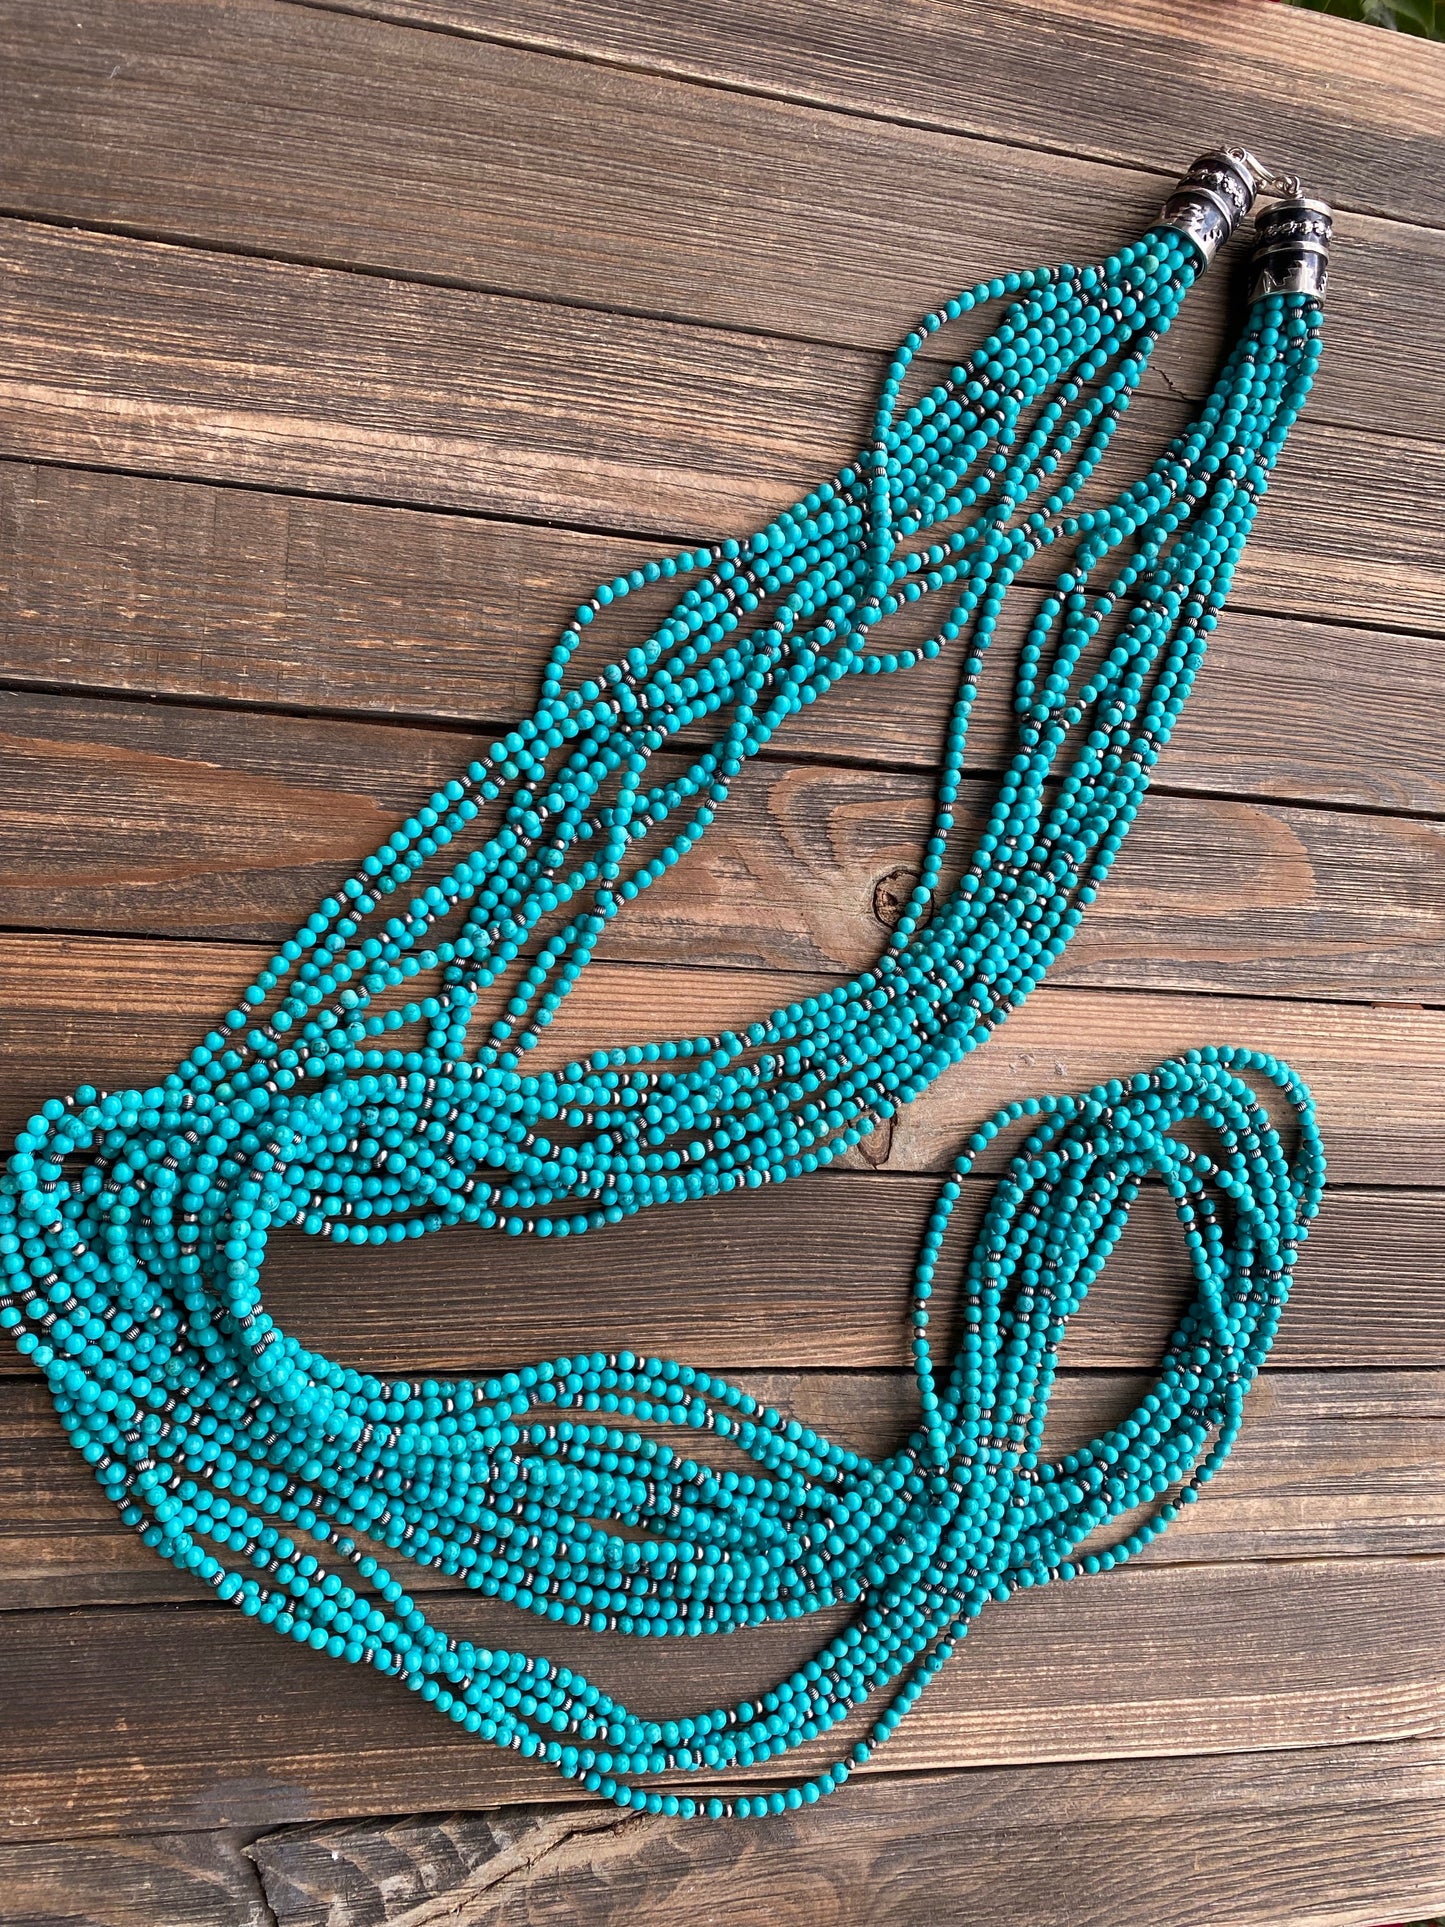 Navajo Natural Kingman Turquoise 64 inch 10 Strand necklace